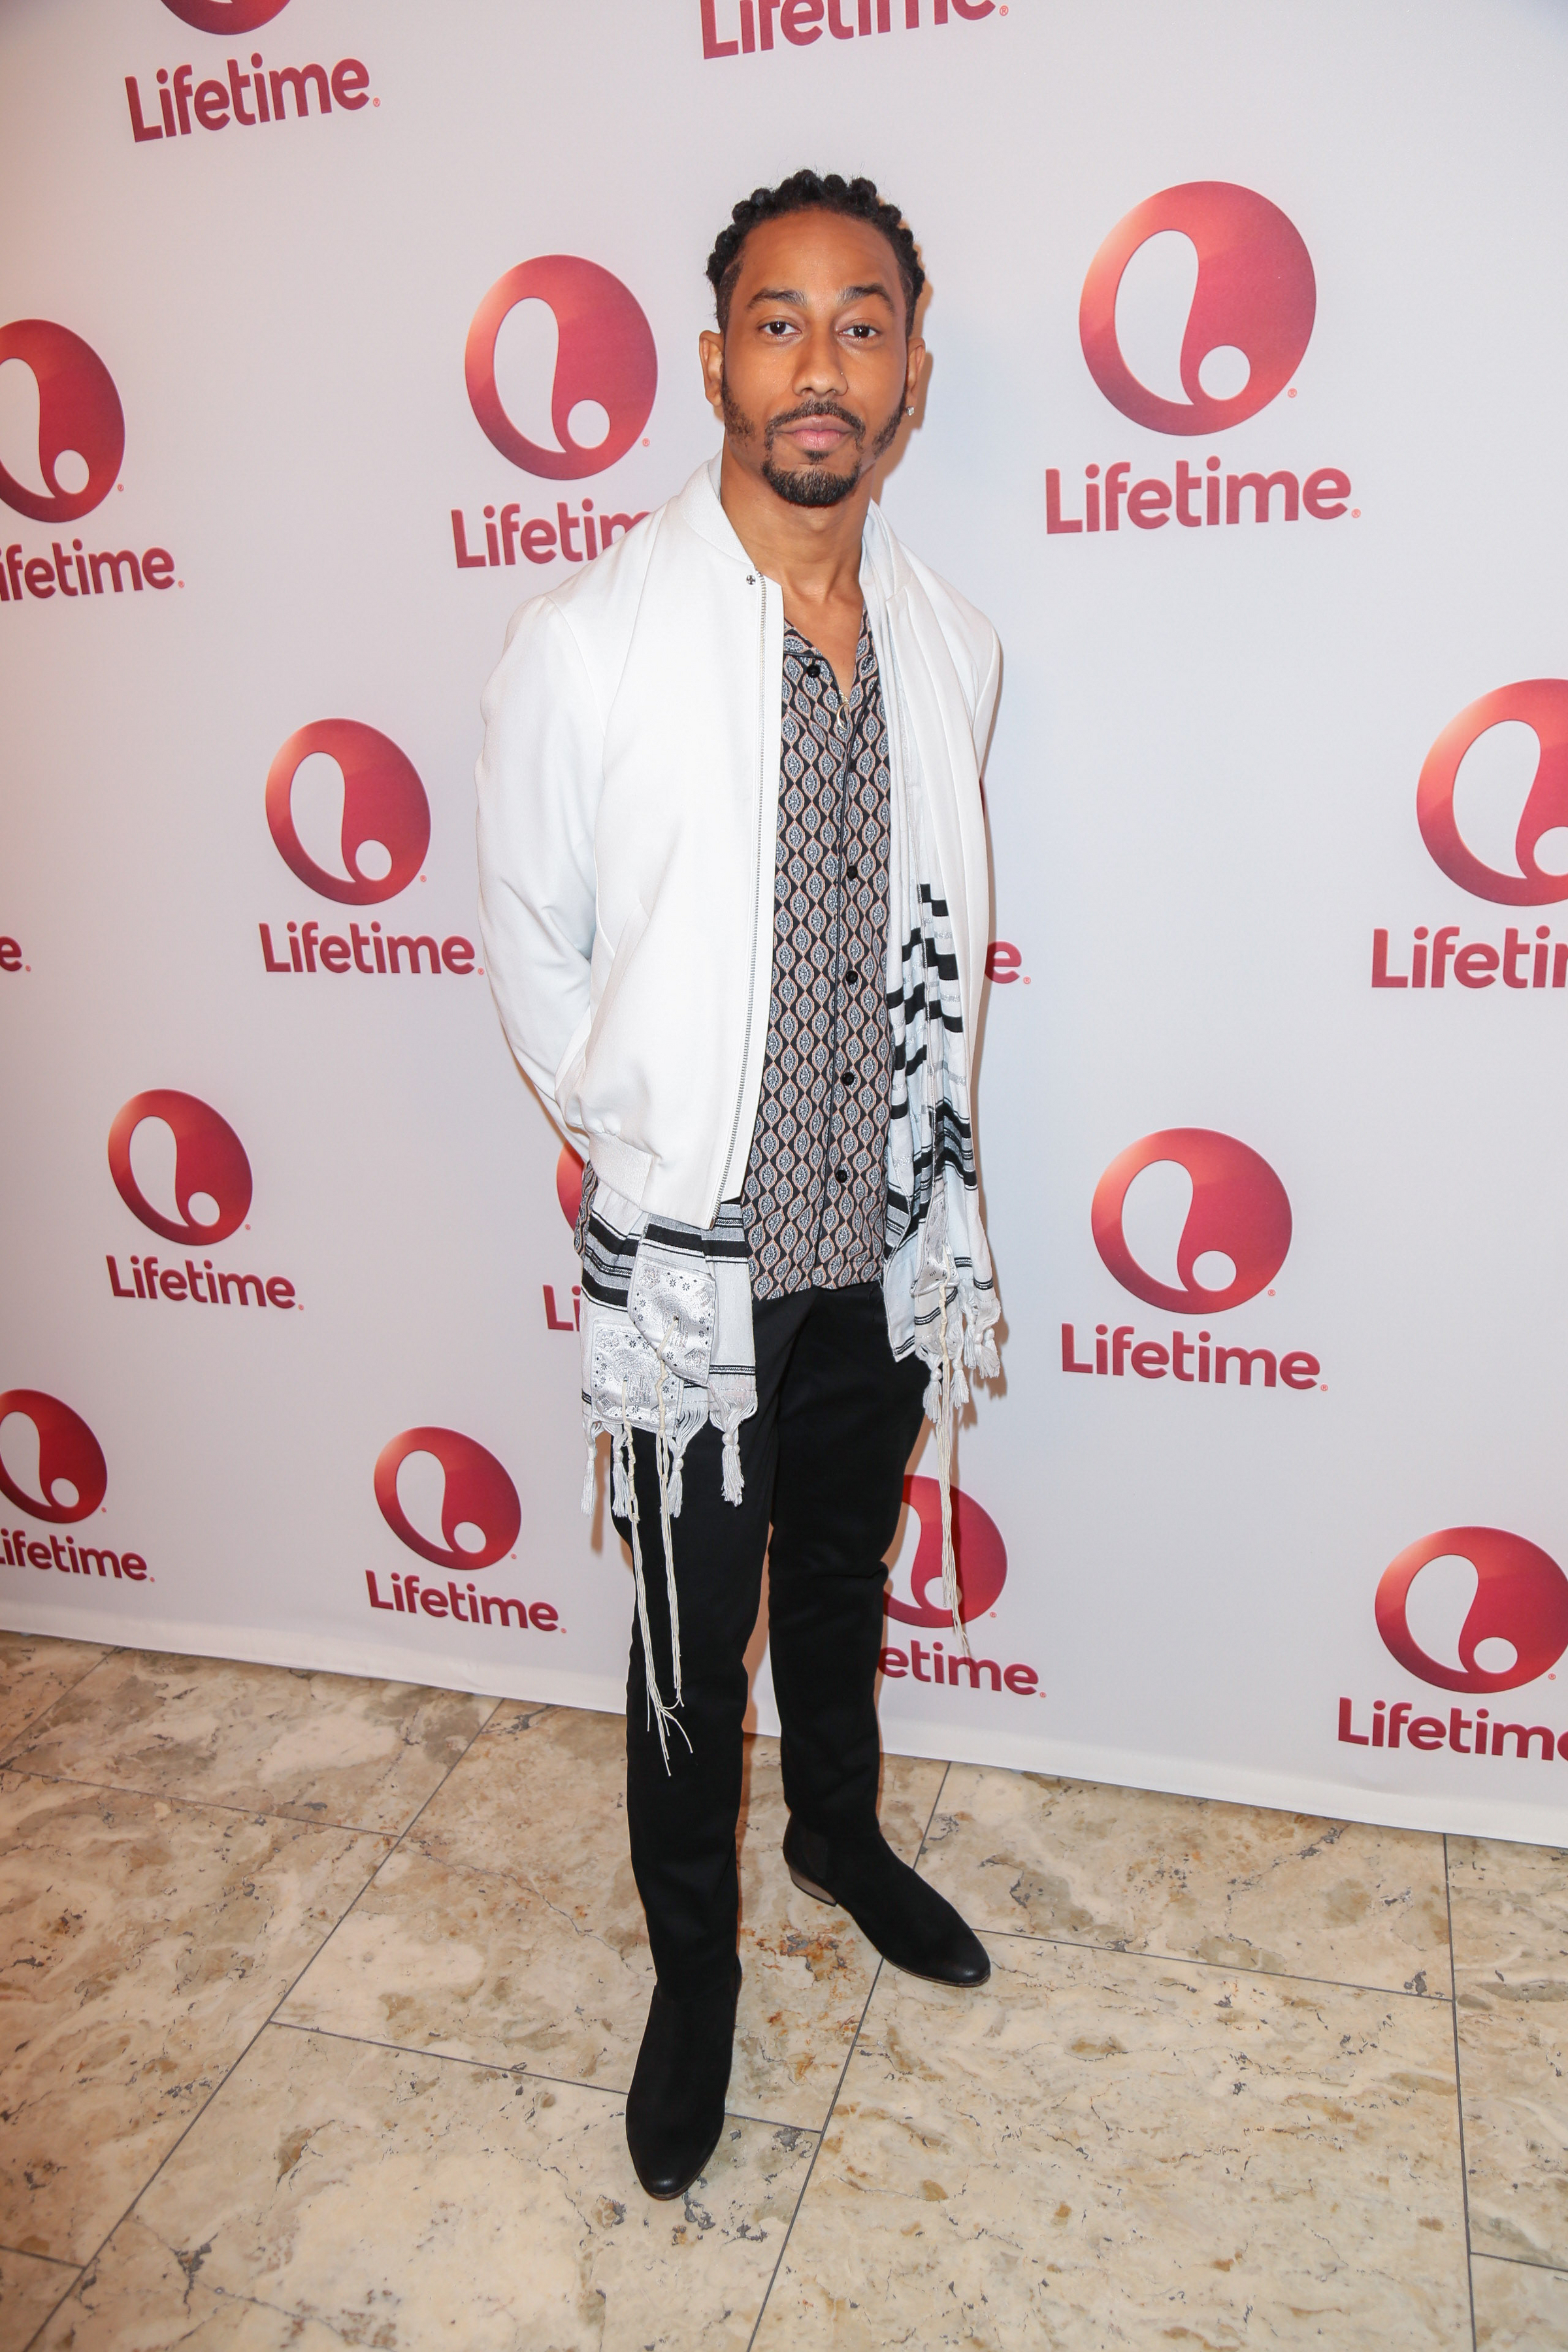 01/23/2017 - Brandon T. Jackson - "Love by the 10th Date" Los Angeles Red Carpet Screening and Panel Event - The London West Hollywood at Beverly Hills, 1020 N San Vicente Boulevard - West Hollywood, CA, USA - Keywords: Vertical, Arrival, Attending, People, Person, Television Movie, Portrait, Photography, Film Industry, Arts Culture and Entertainment, Celebrity, Celebrities, Red Carpet Event, Comedy, TV Movie, Lifetime, Los Angeles, California Orientation: Portrait Face Count: 1 - False - Photo Credit: Guillermo Proano / PR Photos - Contact (1-866-551-7827) - Portrait Face Count: 1